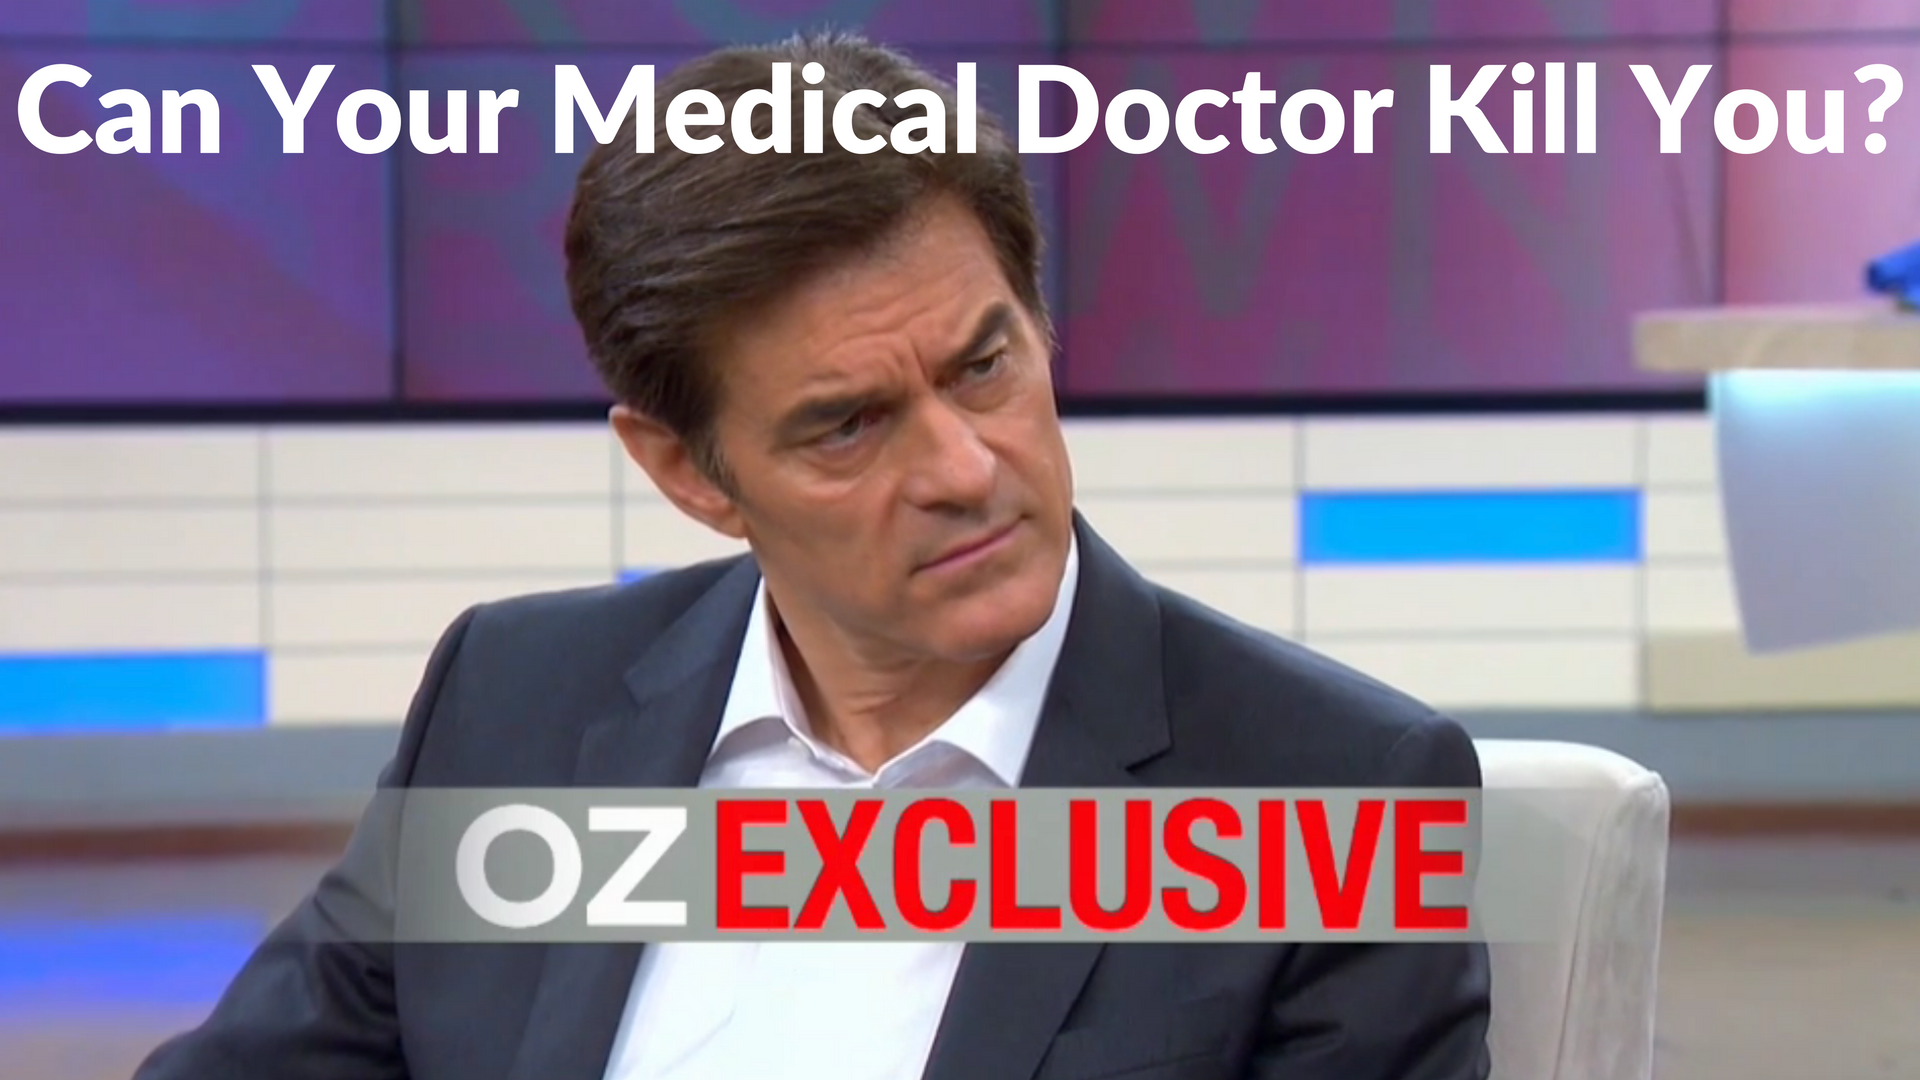 Picture of Dr. Oz to emphasis his sensationalized headlines.